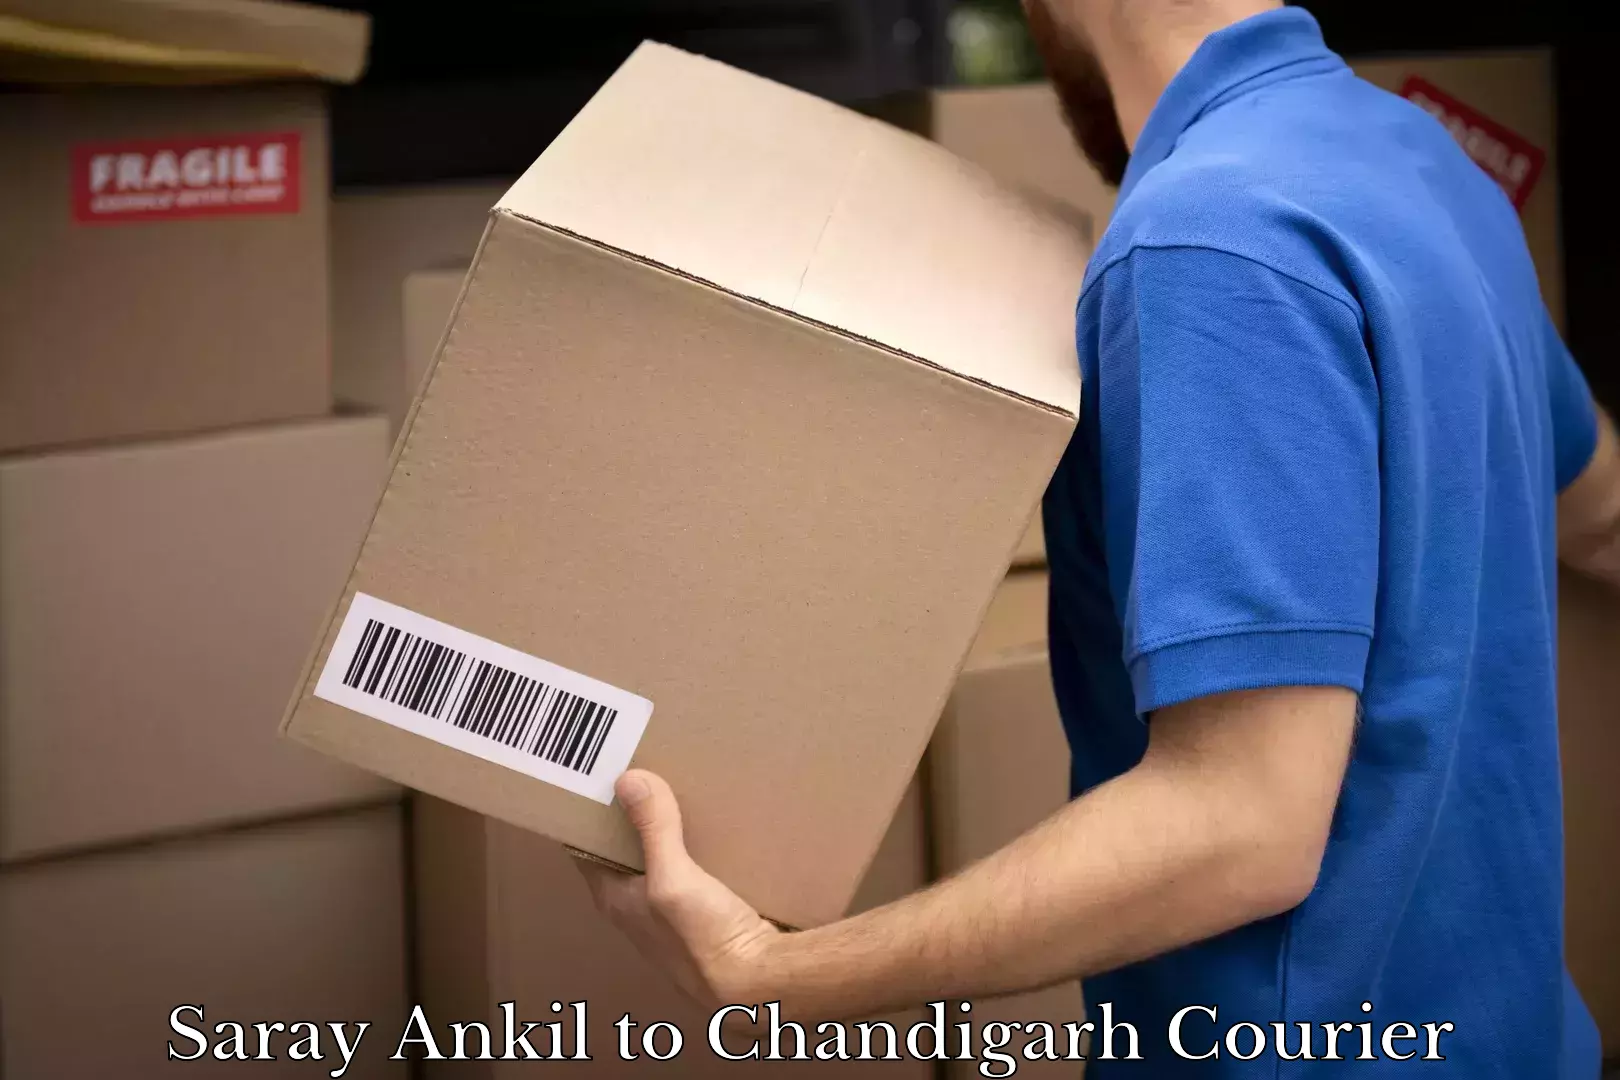 Professional parcel services Saray Ankil to Chandigarh